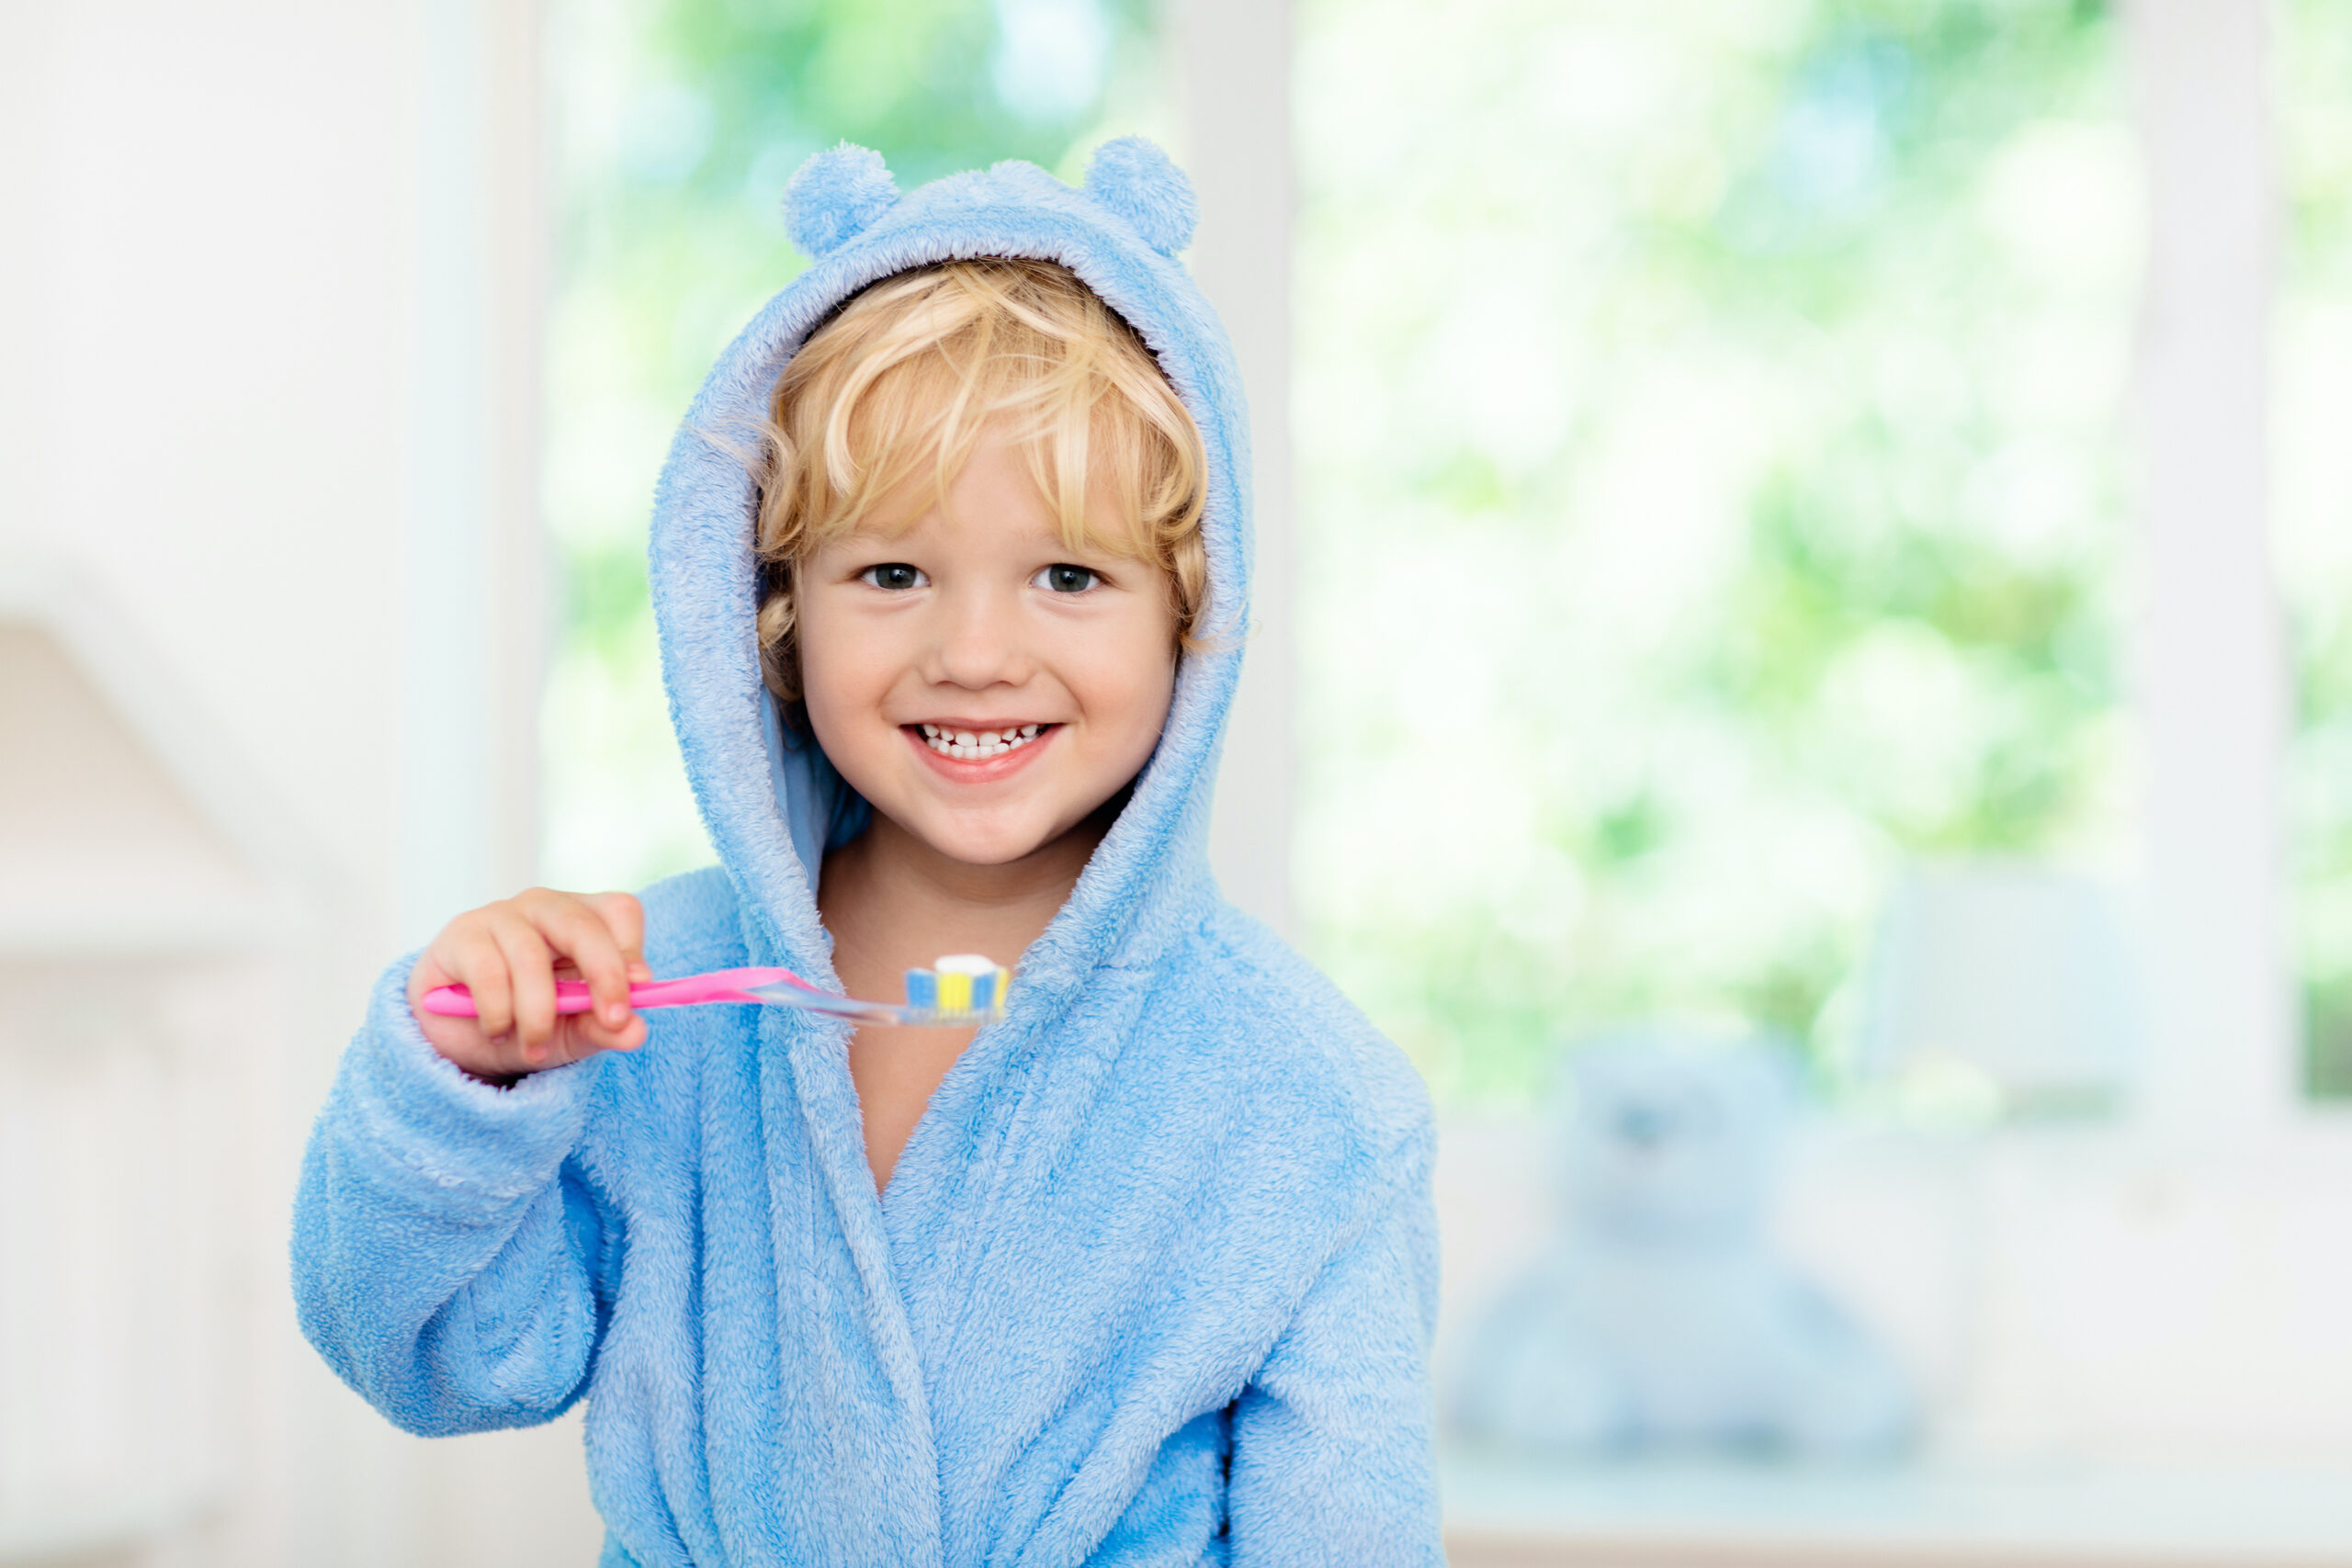 Child brushing teeth. Kids tooth brush and paste. Little baby boy in blue bath robe or towel brushing his teeth in white bathroom with window on sunny morning. Dental hygiene and heath for children. fluoride services